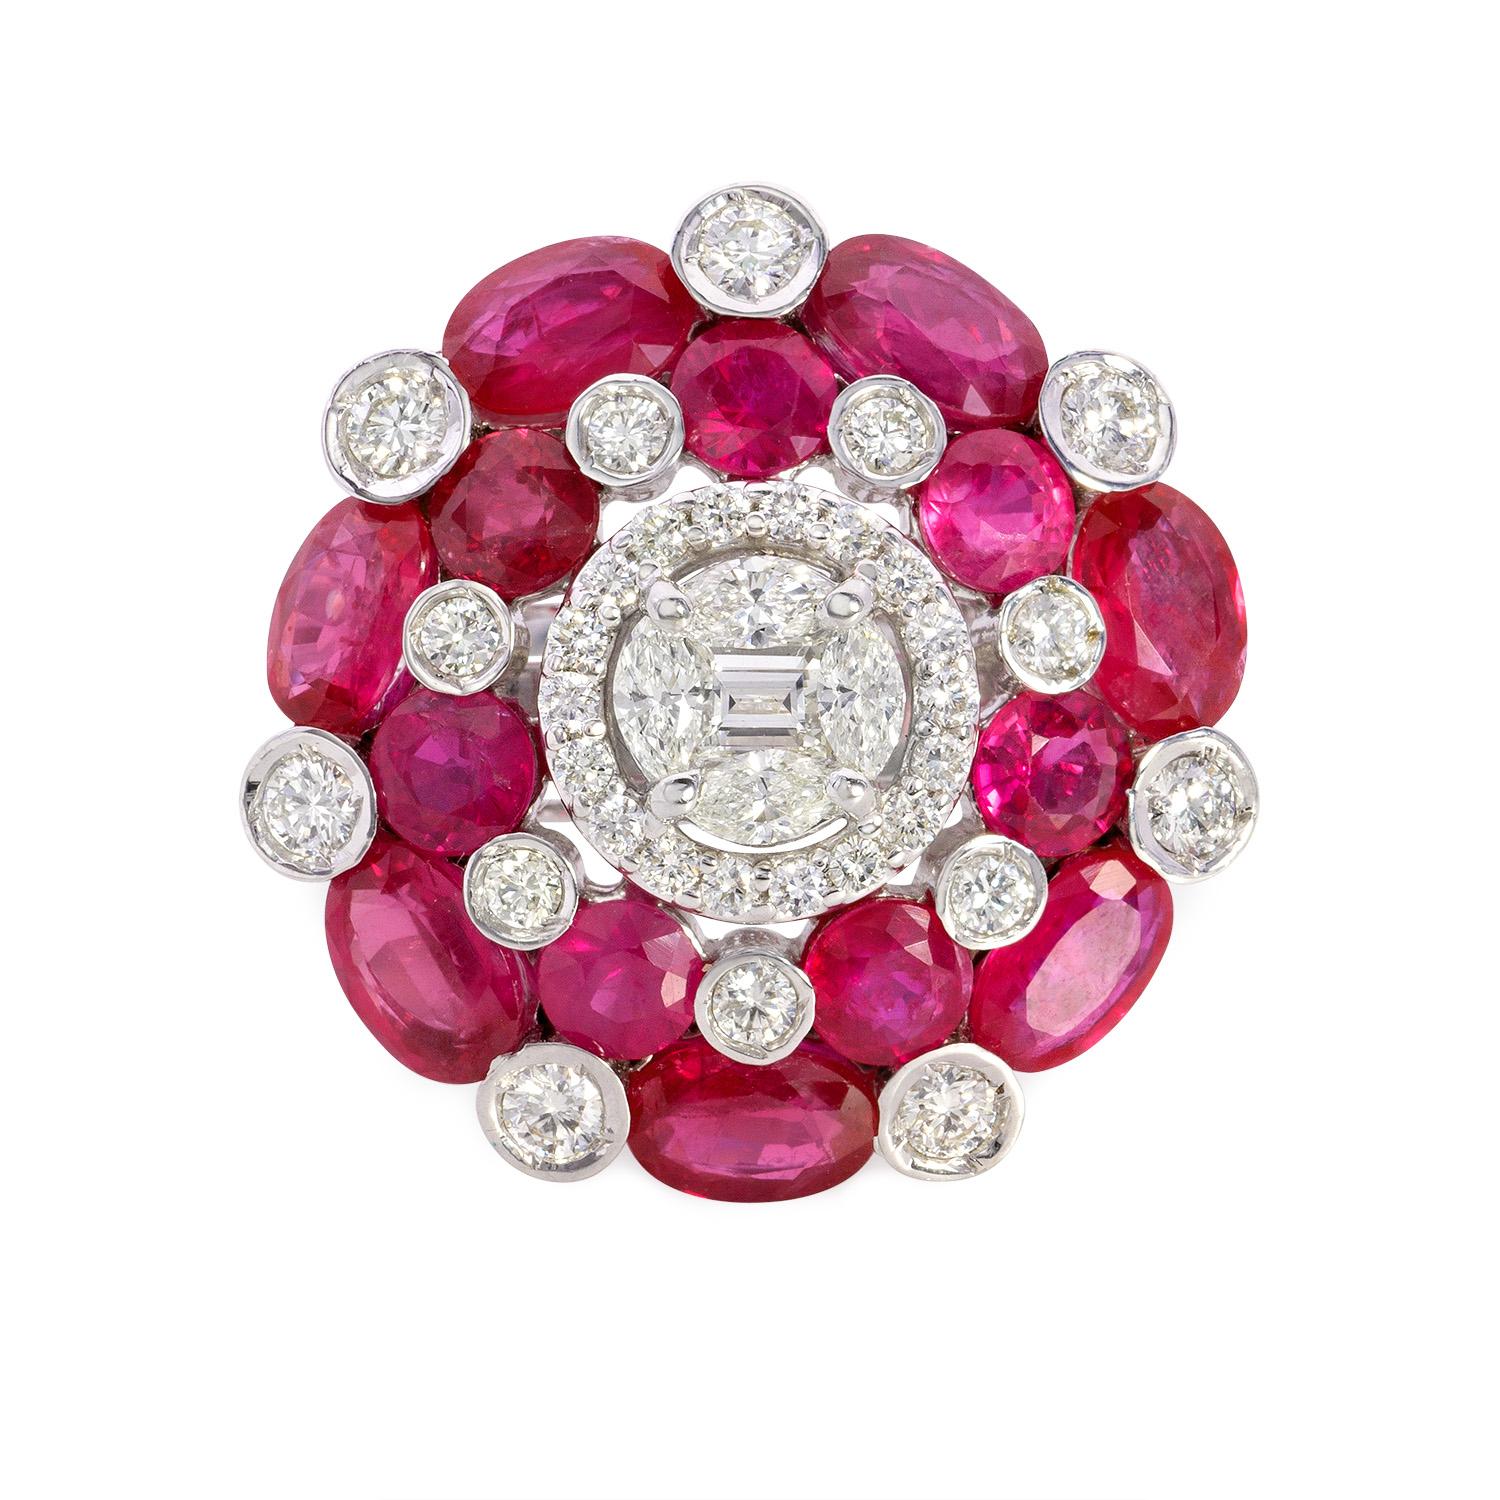 With 7 carats of natural Burmese rubies, seated in a bed of diamonds, the Ziya is made in 14K gold. Pair these with our Ziya earrings.

Gemstone Details
Natural Rubies
Type 	Natural Rubies 
Color	Red
Clarity 	Fine
Weight 	7 carats
Origin And